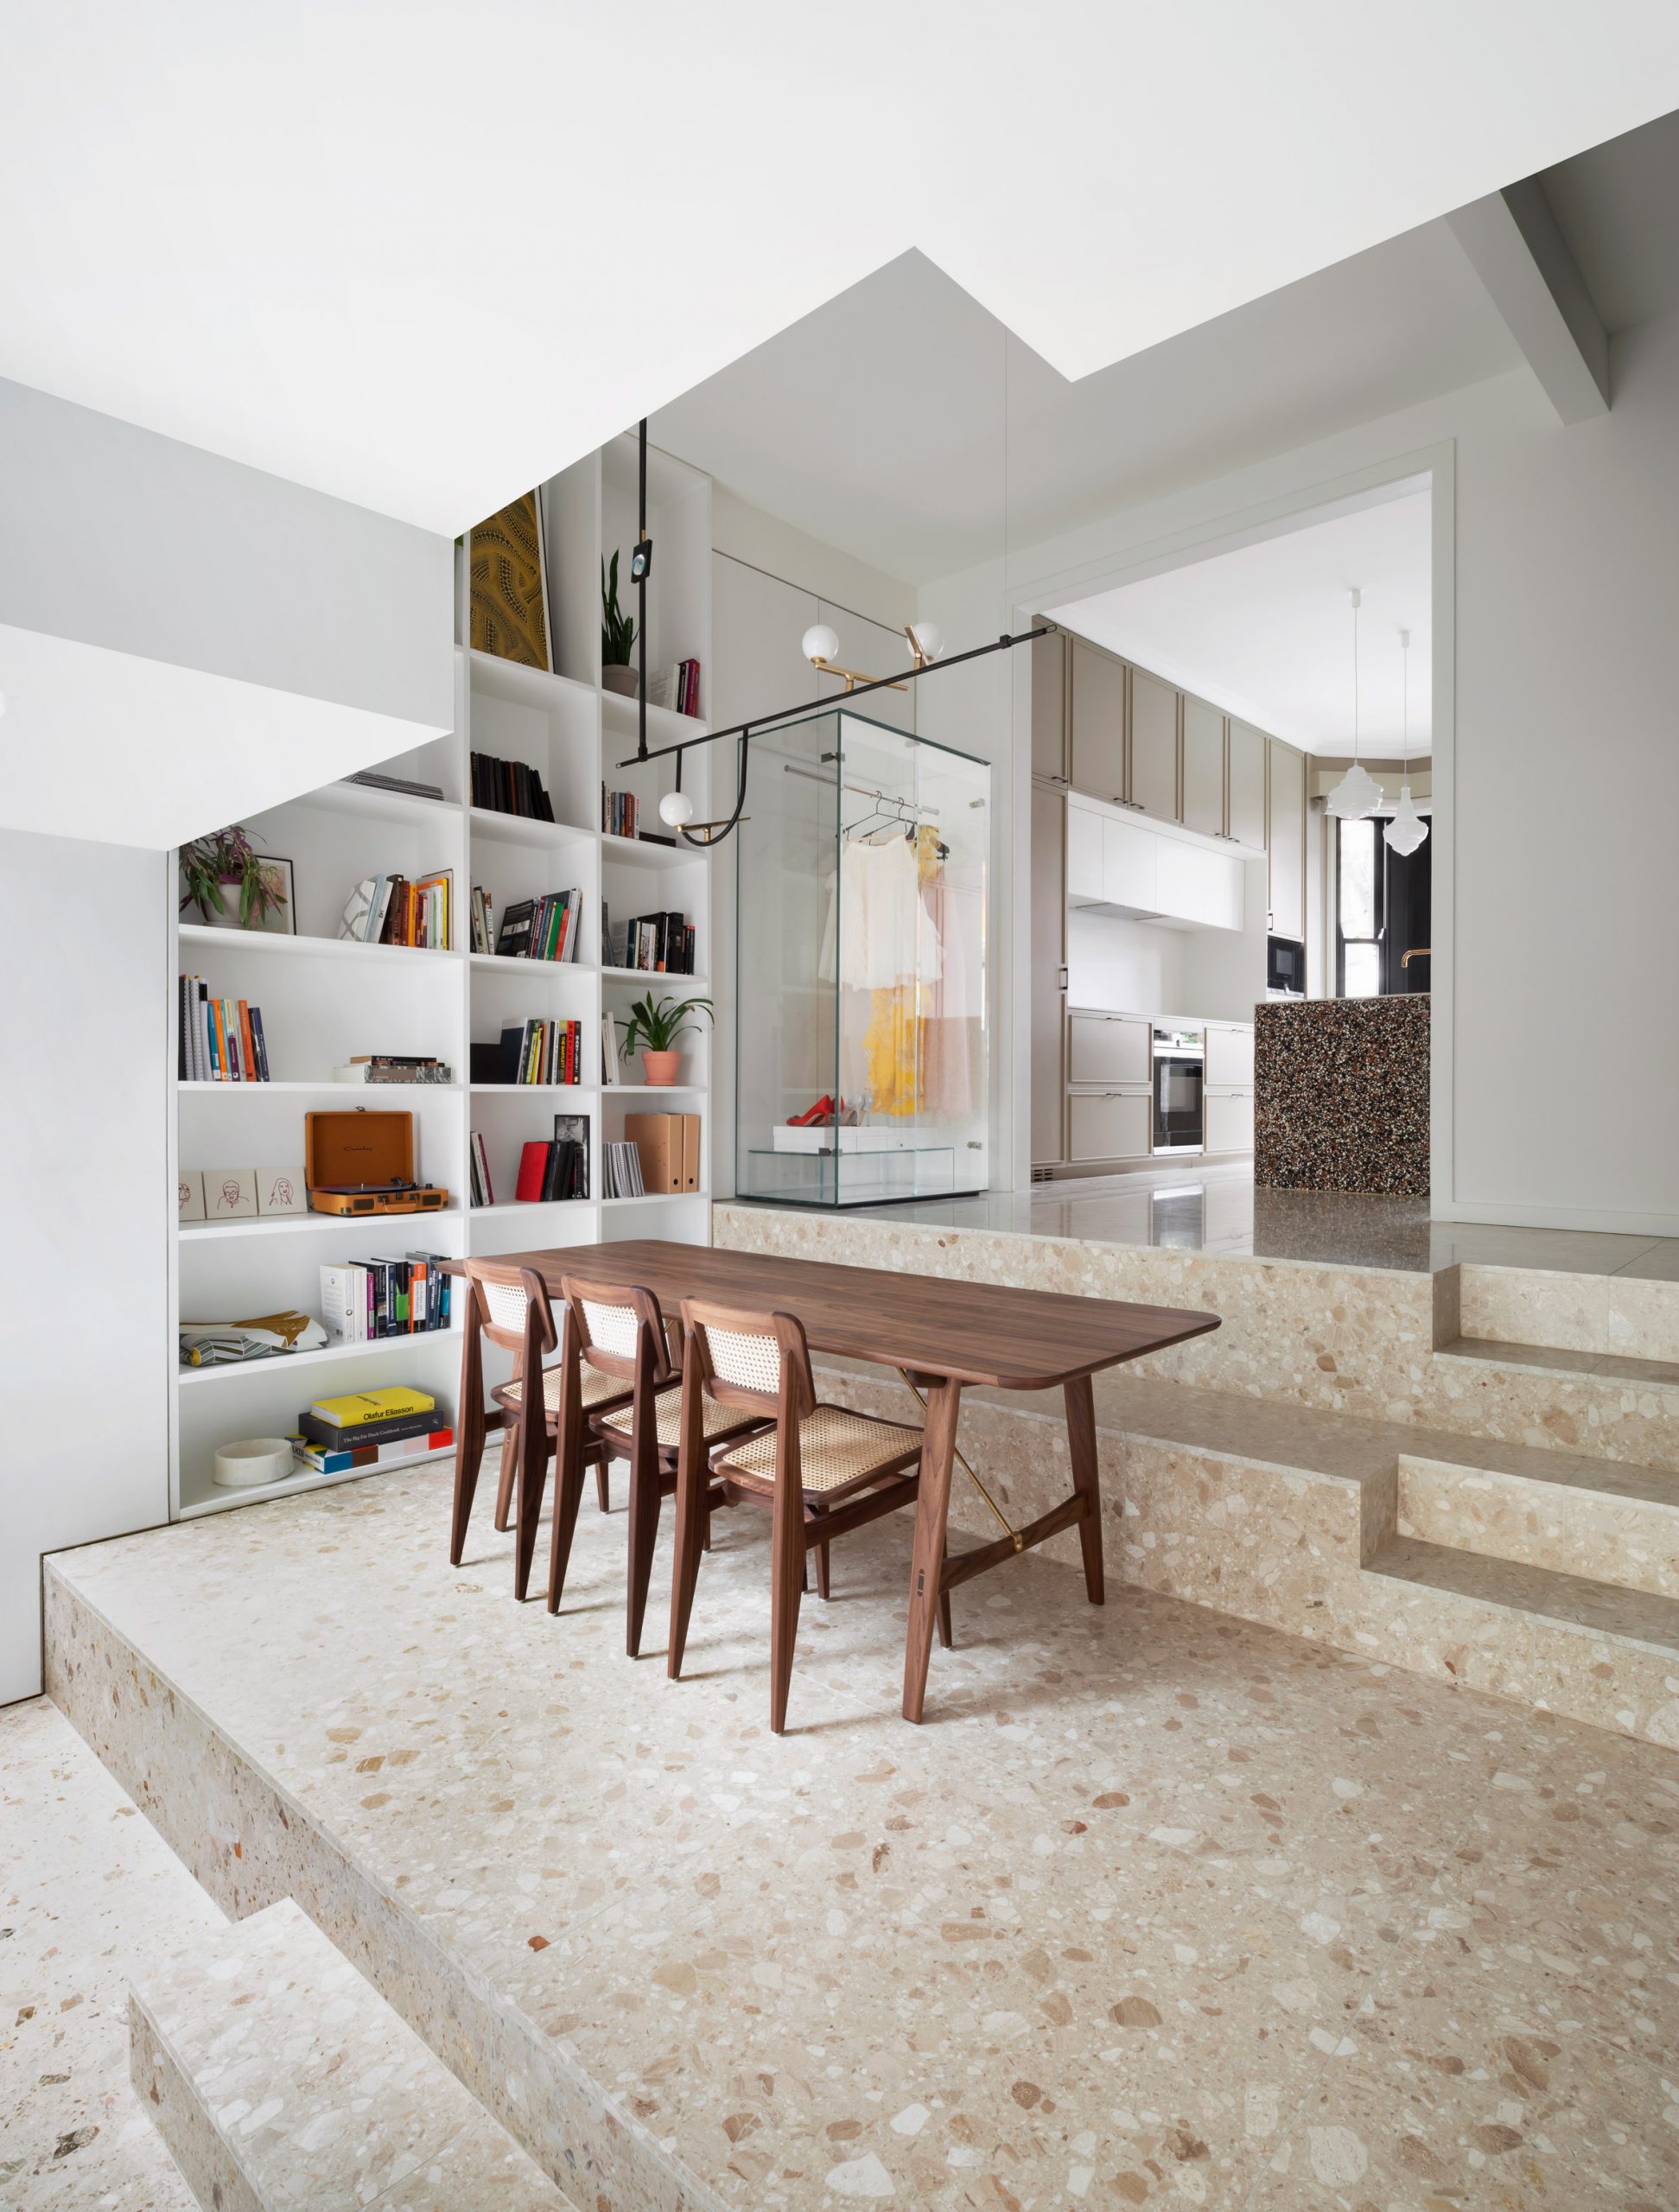 Dining space in Frame House by Bureau de Change